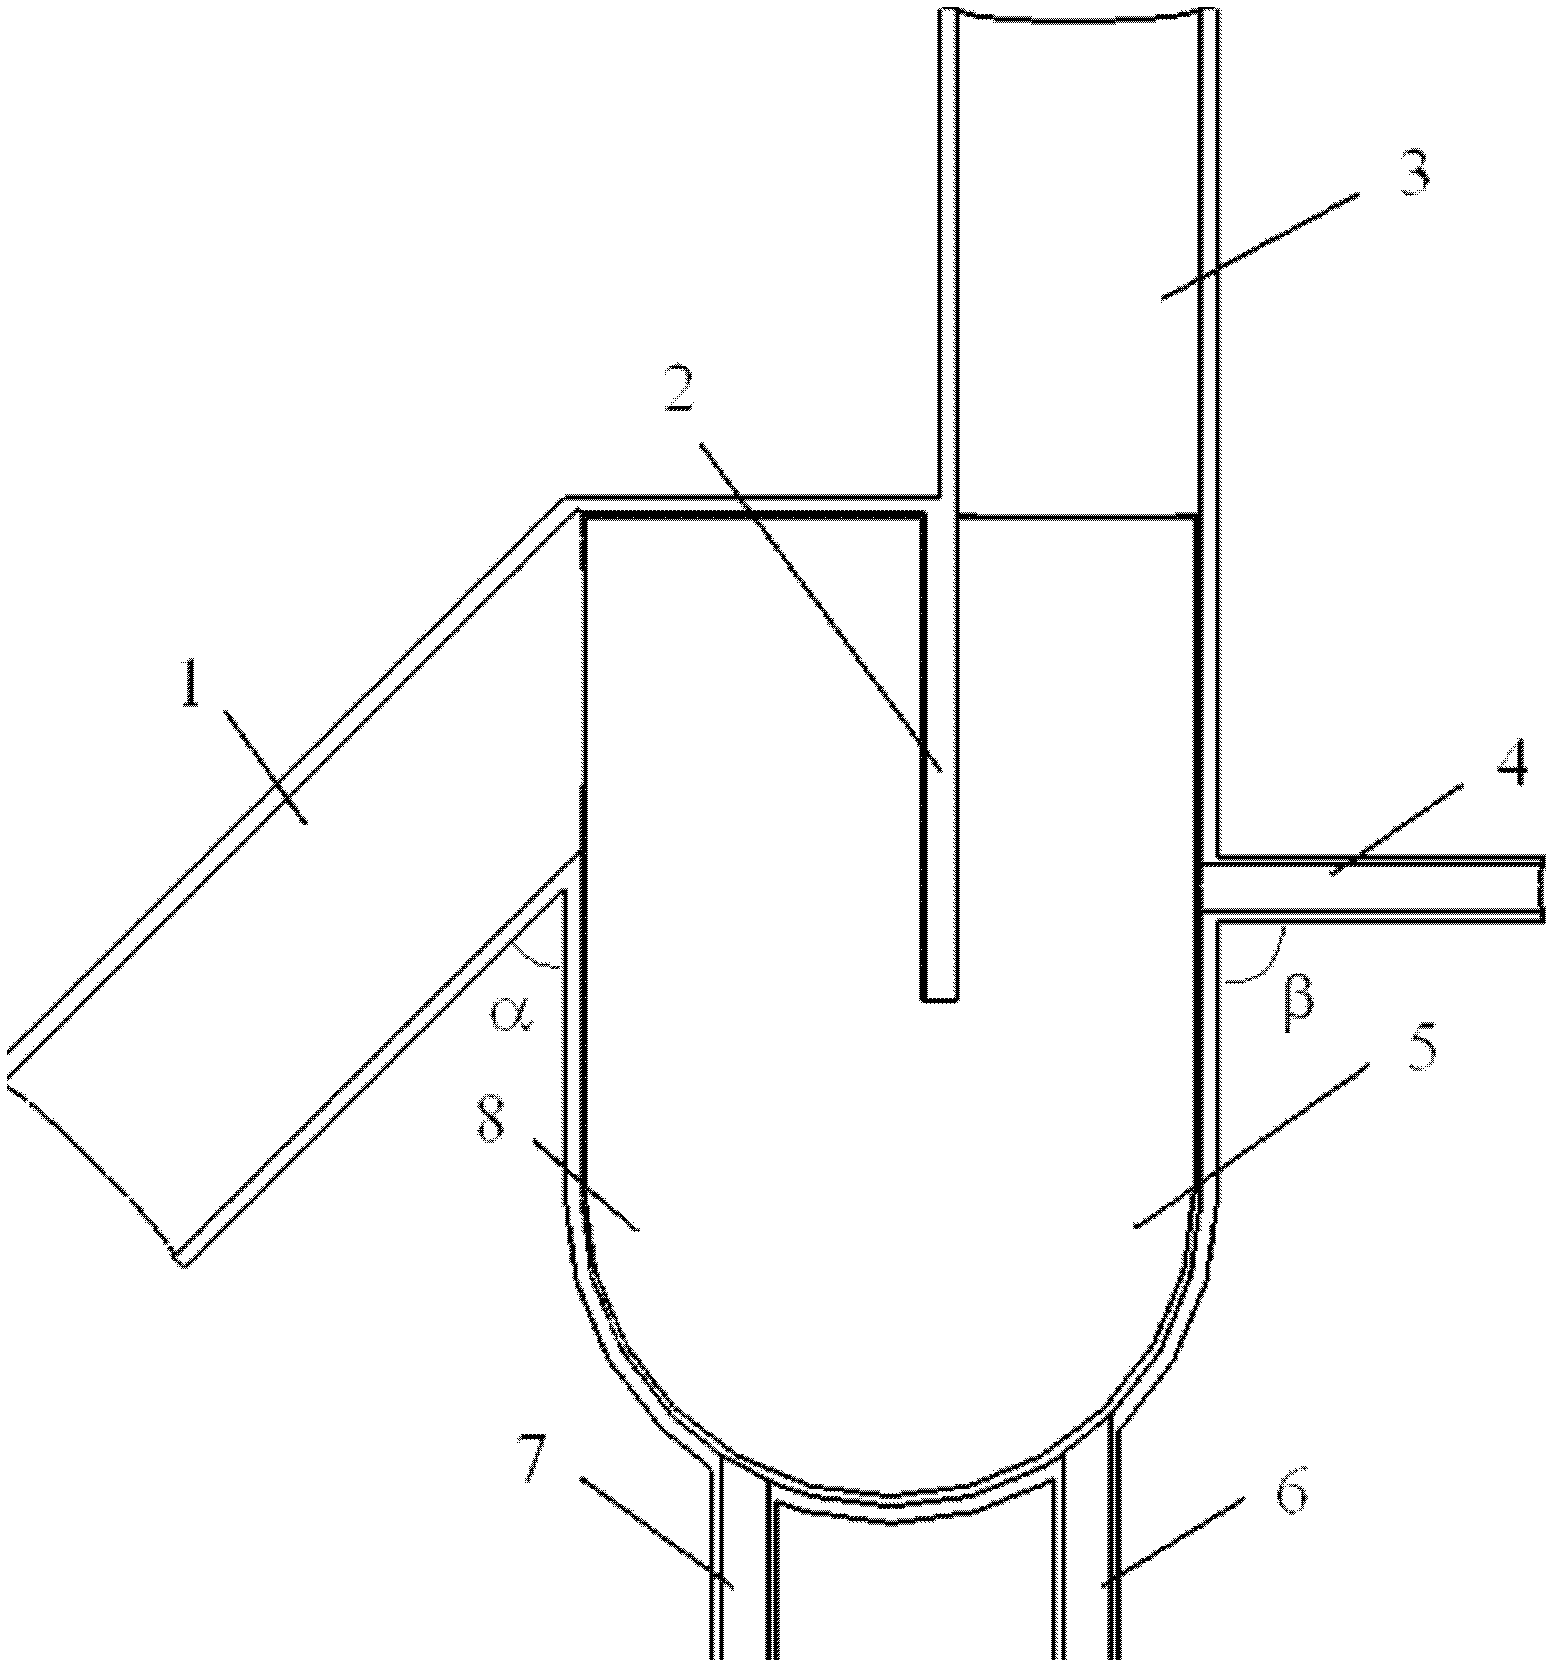 Circular-arc-shaped U valve material returning device for high-density circulating fluidized bed utilizing B-class particle